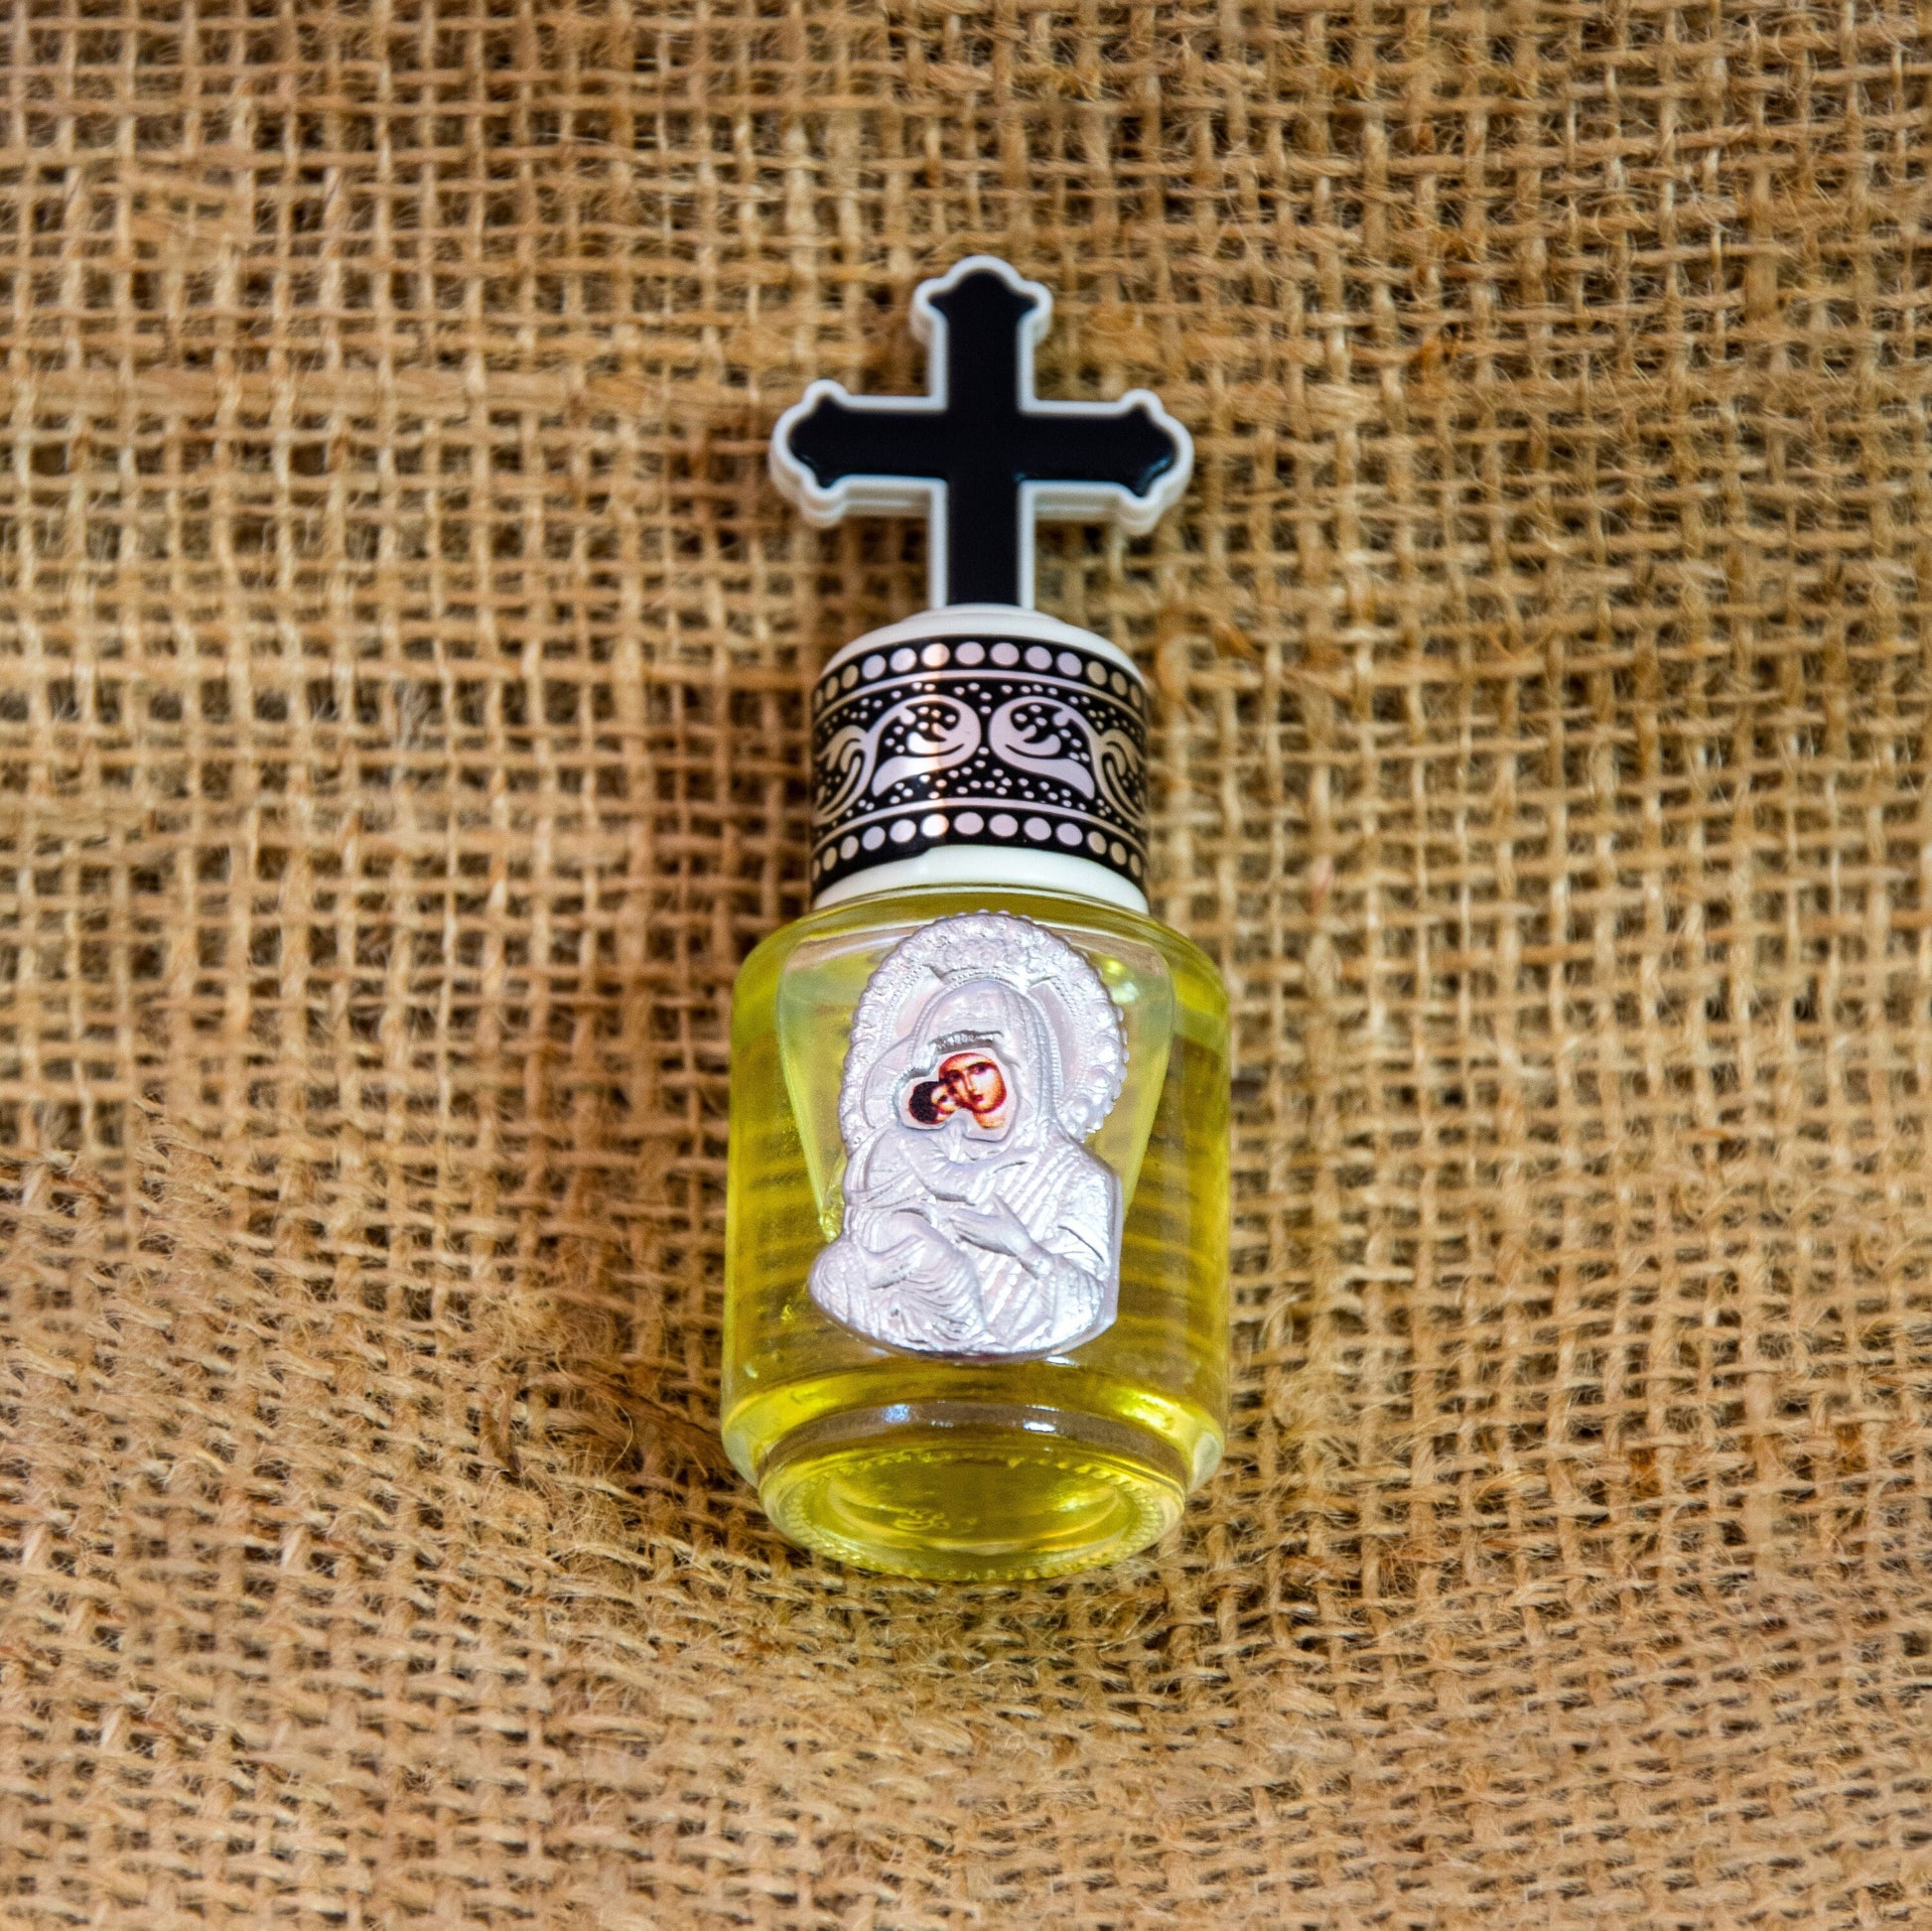 Holy Anointing Oil from Mount Athos, Holy Myrrh, Blessed Myron Consecrated Oil, Chrism Incense Healing Prayer Oil, Spiritual gift TheHolyArt